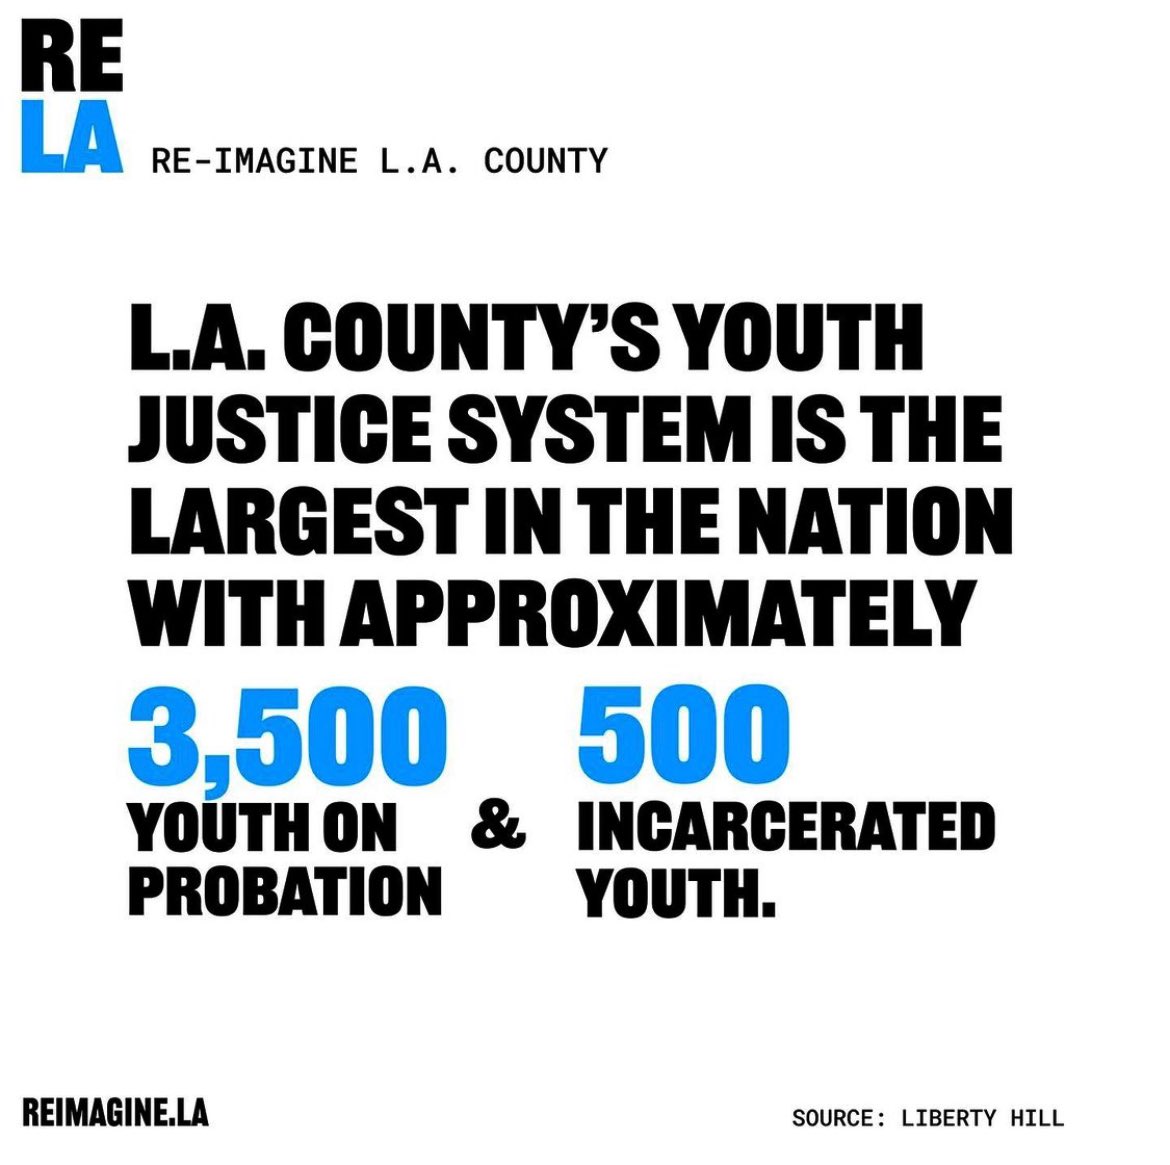 L.A. County spent $800,000 to incarcerate ONE person last year. 🤯

That same money could provide a diversion path for 95 system-impacted youth or fund enrollment for 1,600 kids in youth development programs instead. 💯#FullyFundCareFirst #YouthJusticeReimagined #CareFirstBudget